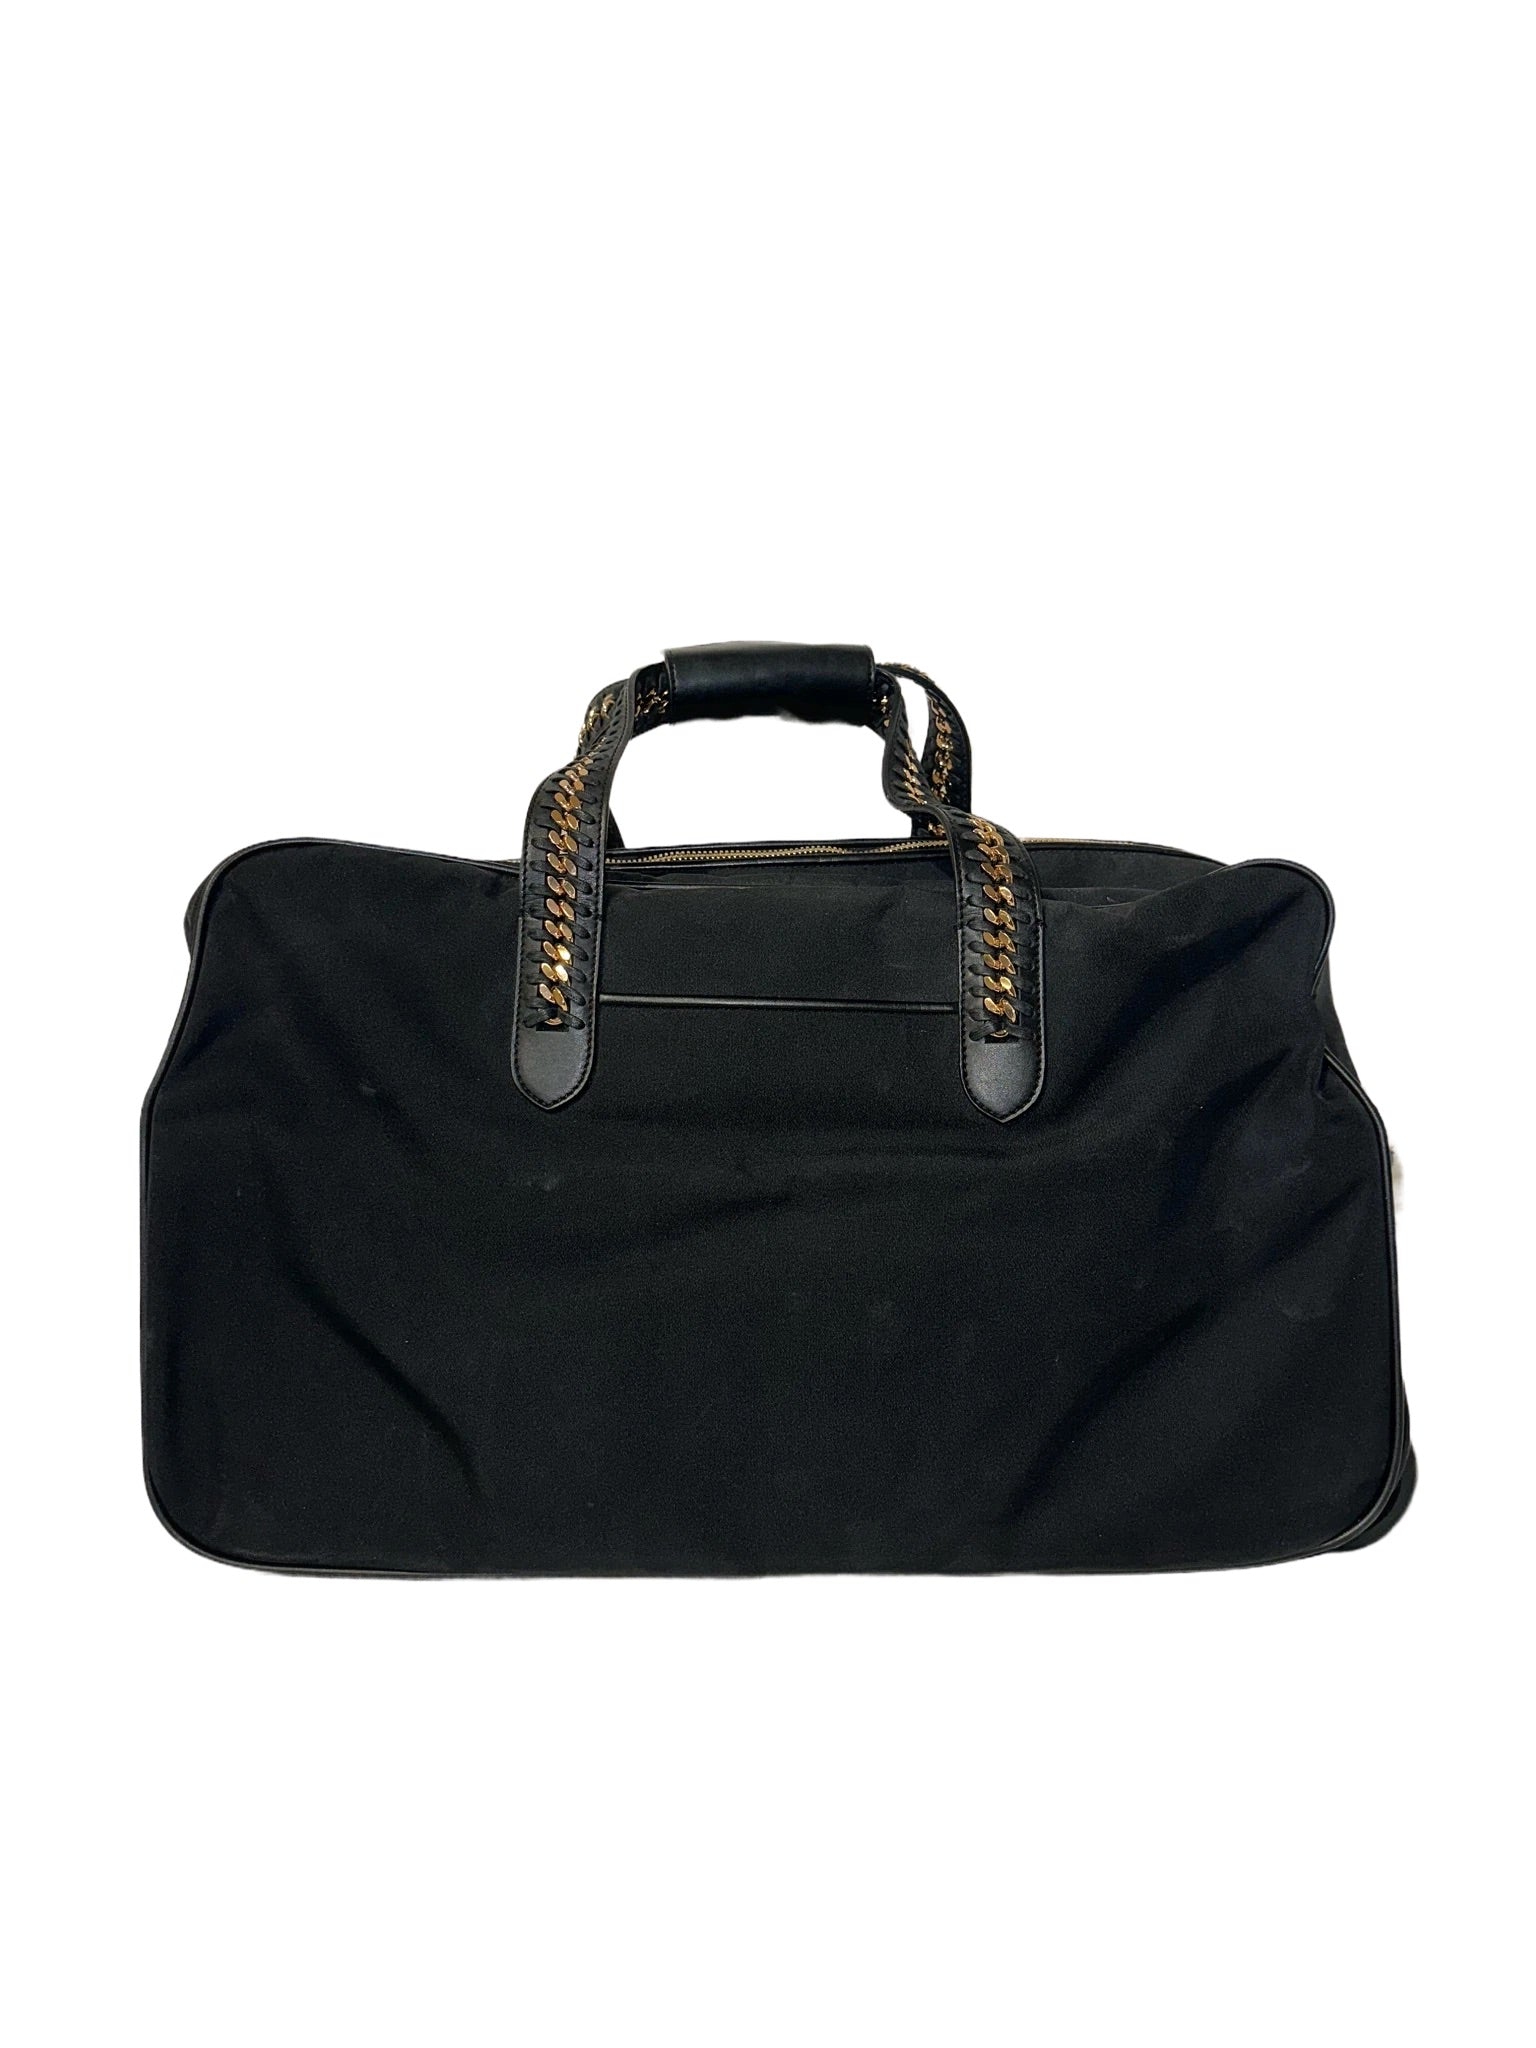 Black Duffel Bag with Rollers